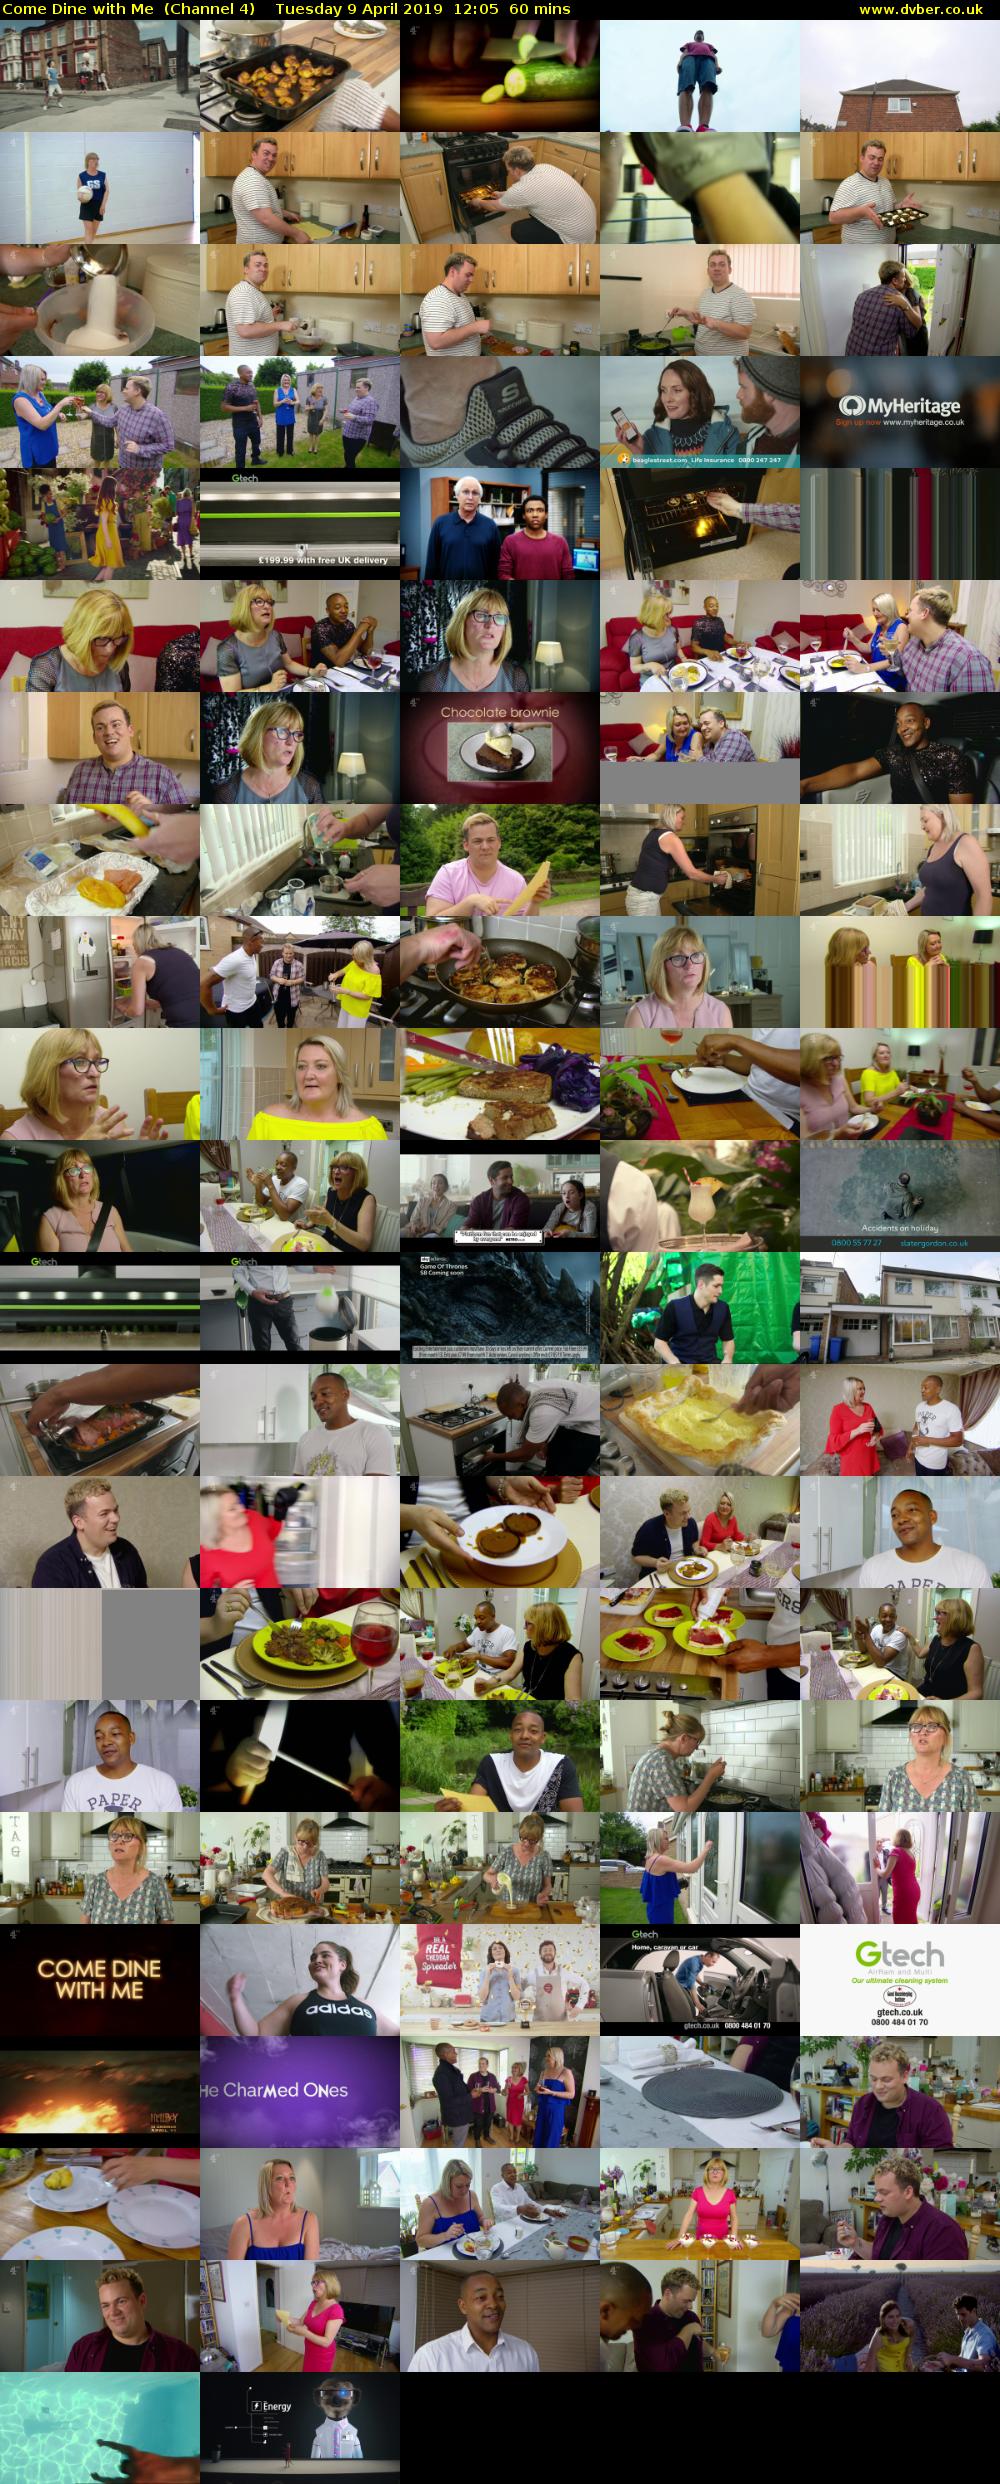 Come Dine with Me  (Channel 4) Tuesday 9 April 2019 12:05 - 13:05